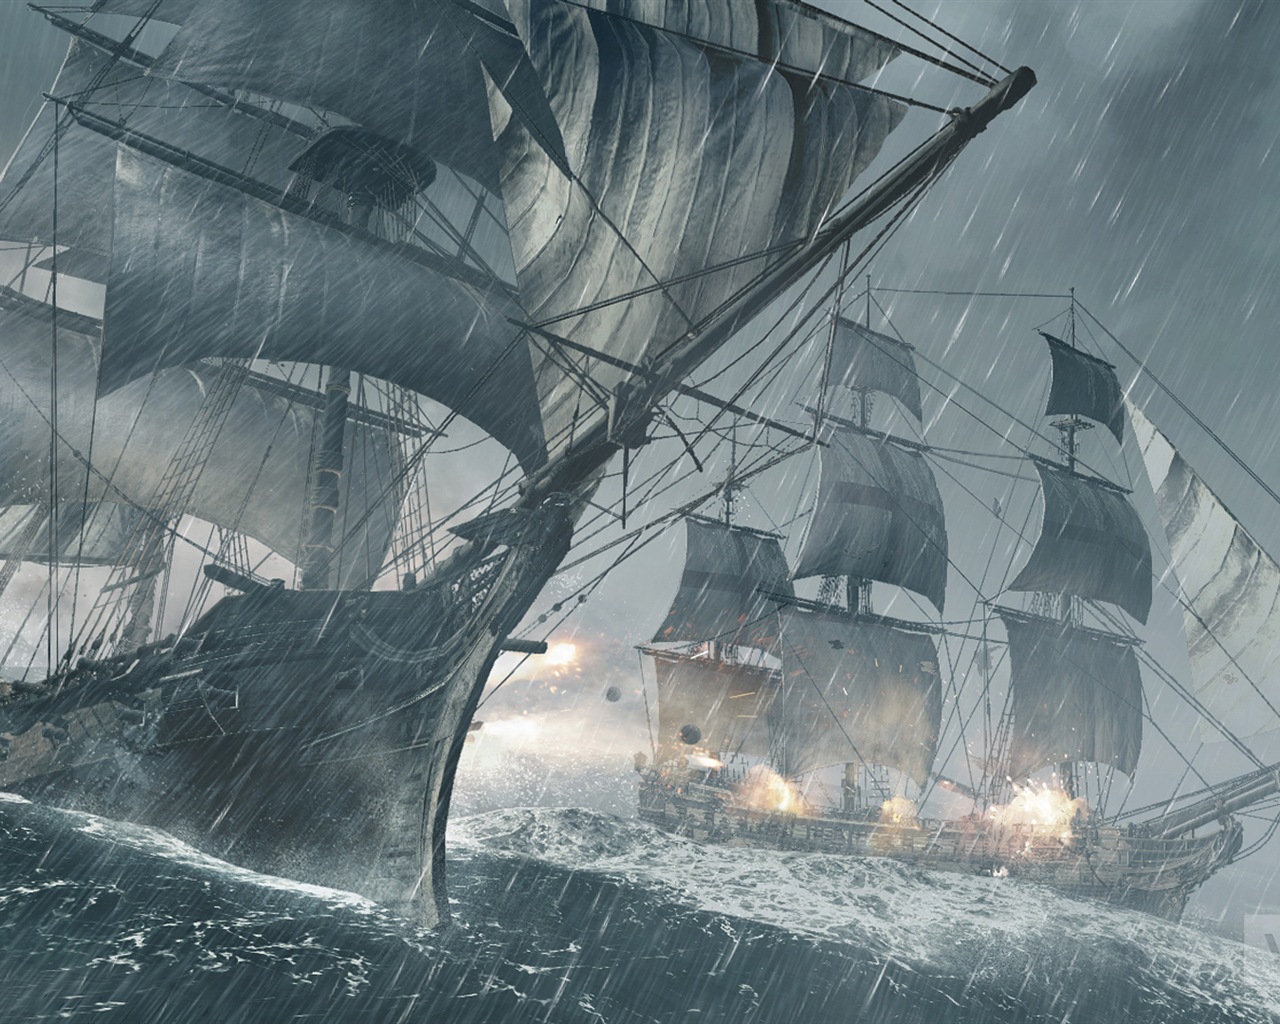 Creed IV Assassin: Black Flag HD wallpapers #19 - 1280x1024